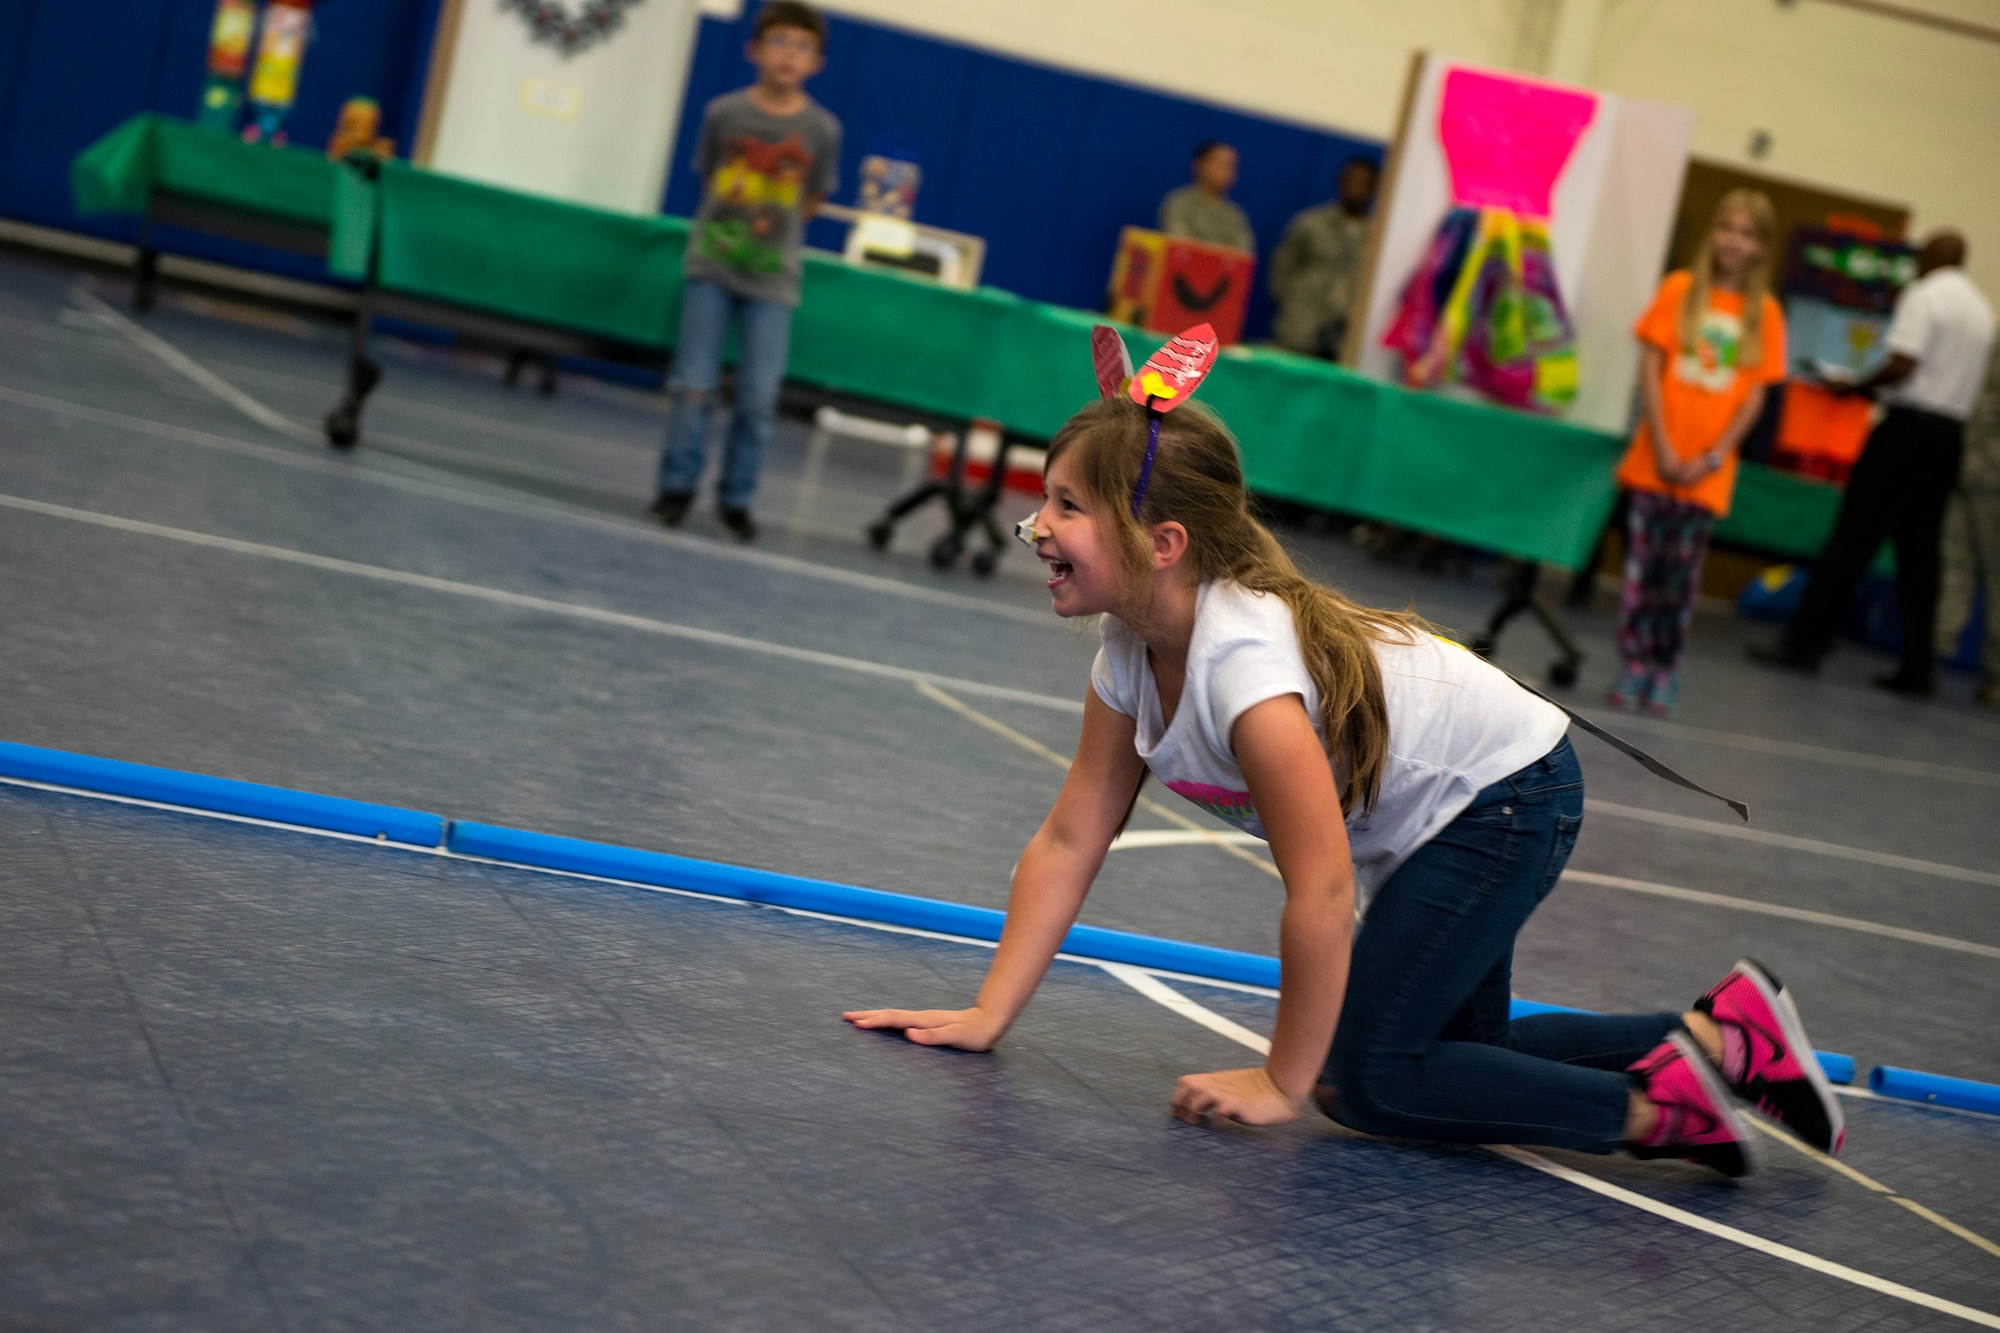 A fashion show participant dressed as a pig crawls down the catwalk during the 23d Civil Engineer Squadron Recycling Science Fair, Nov. 15, 2017, at Moody Air Force Base, Ga. The 23d CES partnered with Moody's Youth Programs for America Recycles Day. The event consisted of a fashion show, where everything was made out of recycled materials. It was designed to help foster more interest in recycling, to increase recycling on base and promote less solid waste to landfills. (U.S. Air Force photo by Airman 1st Class Erick Requadt)